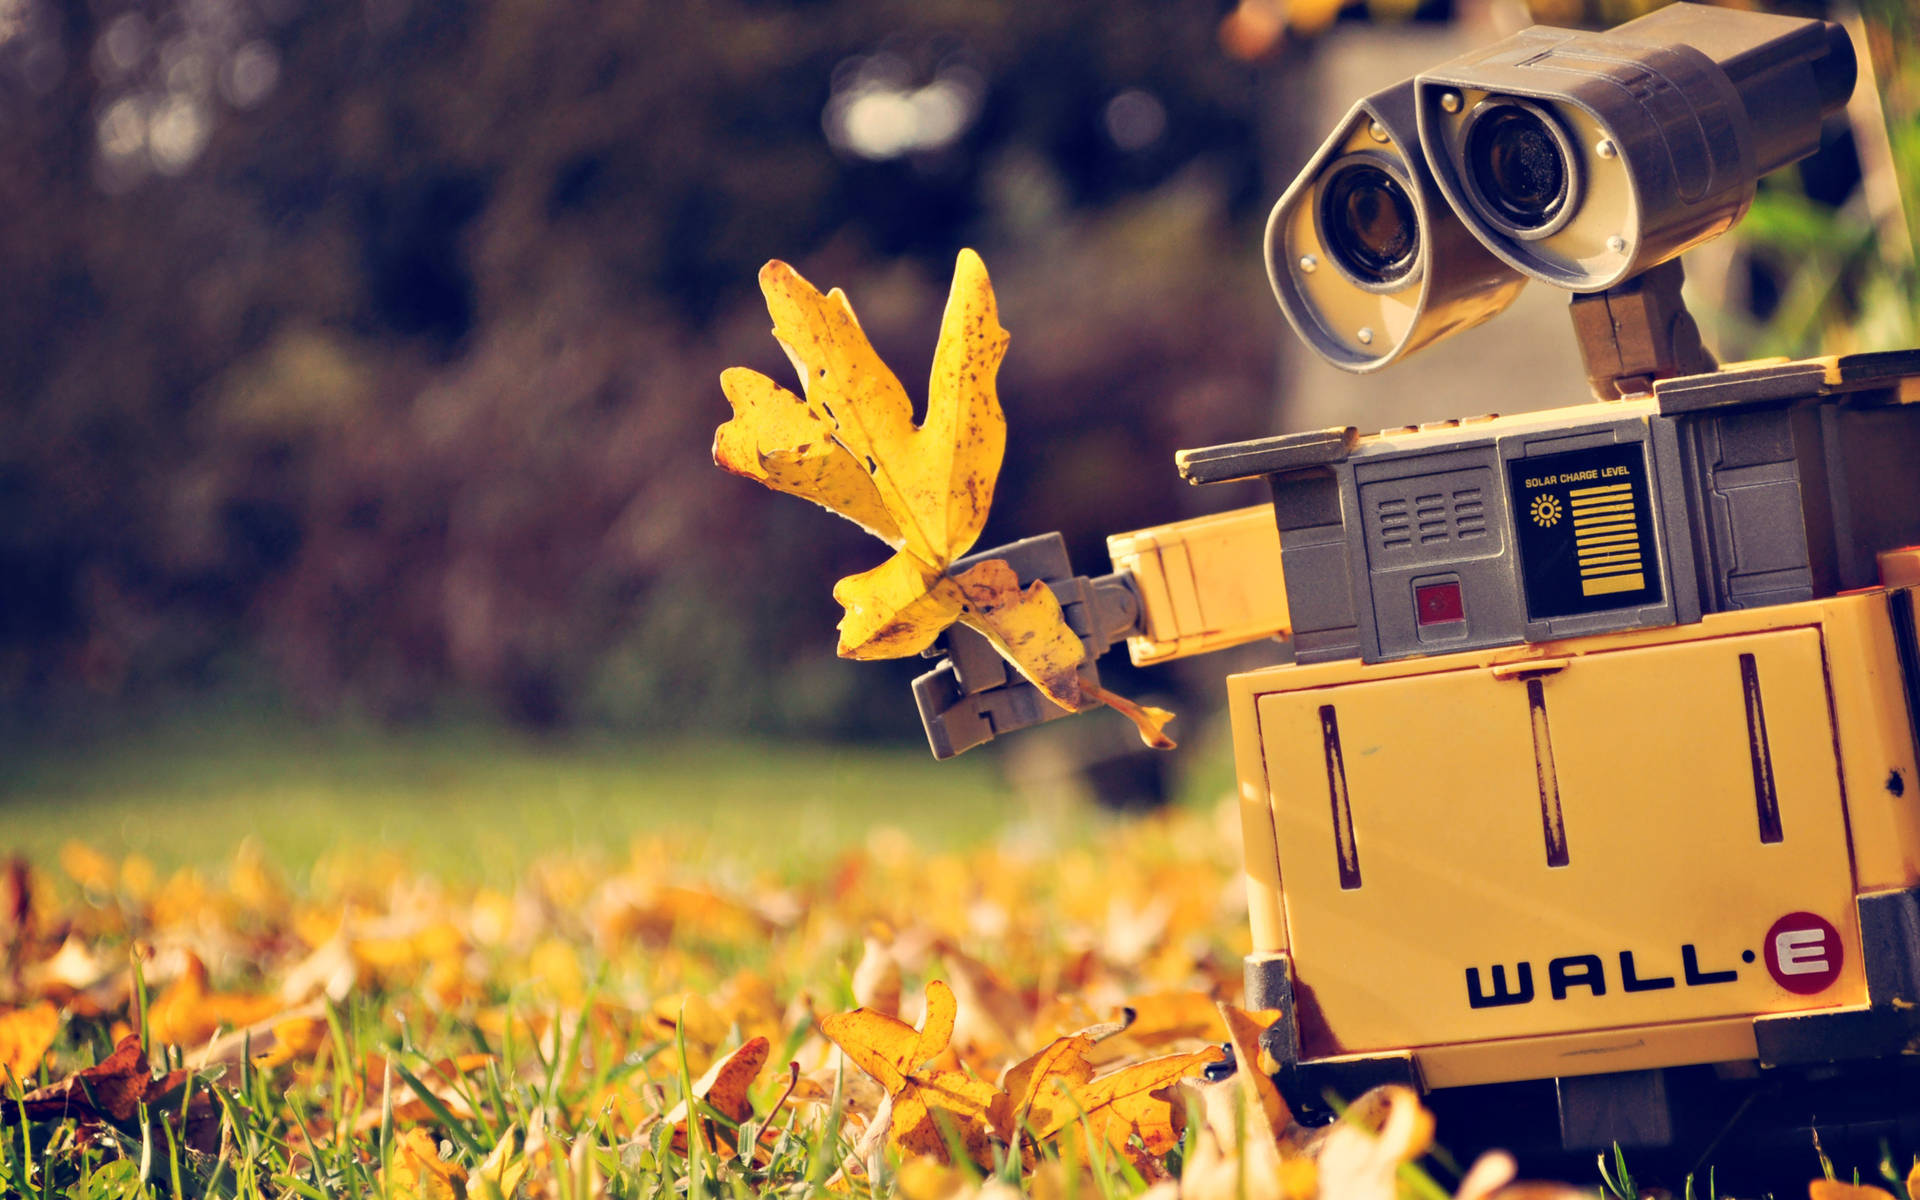 Wall E With Autumn Leaves